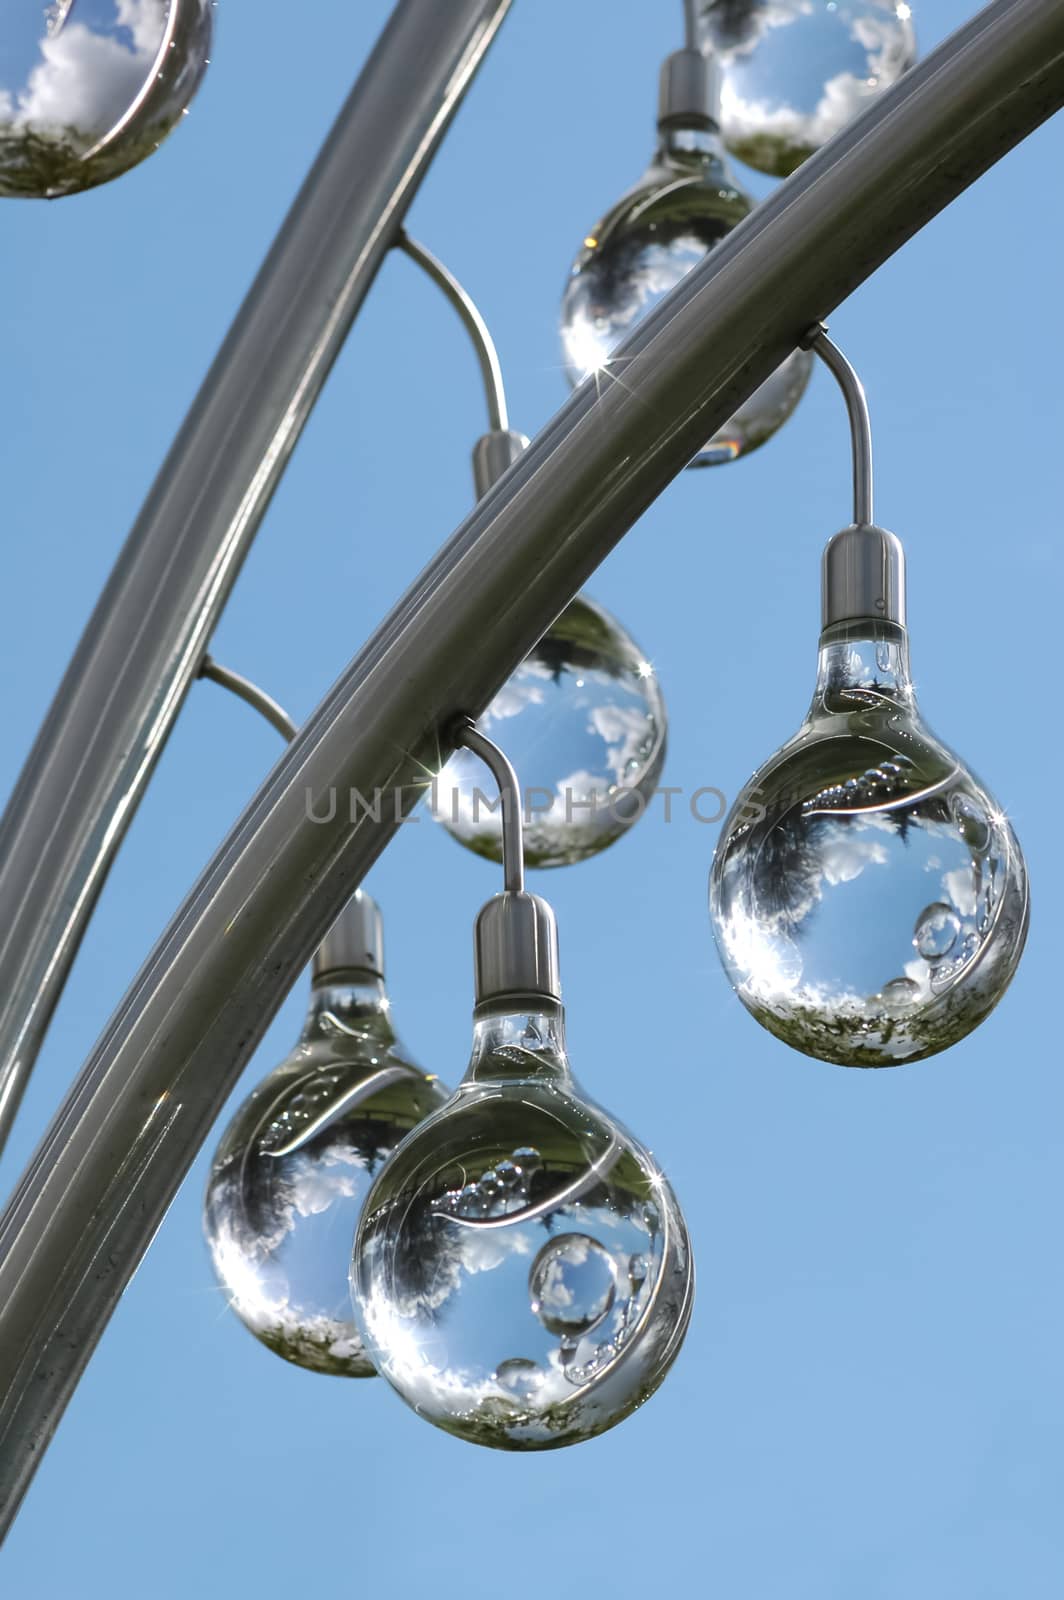 decorative glass spheres hanging from a metal frame